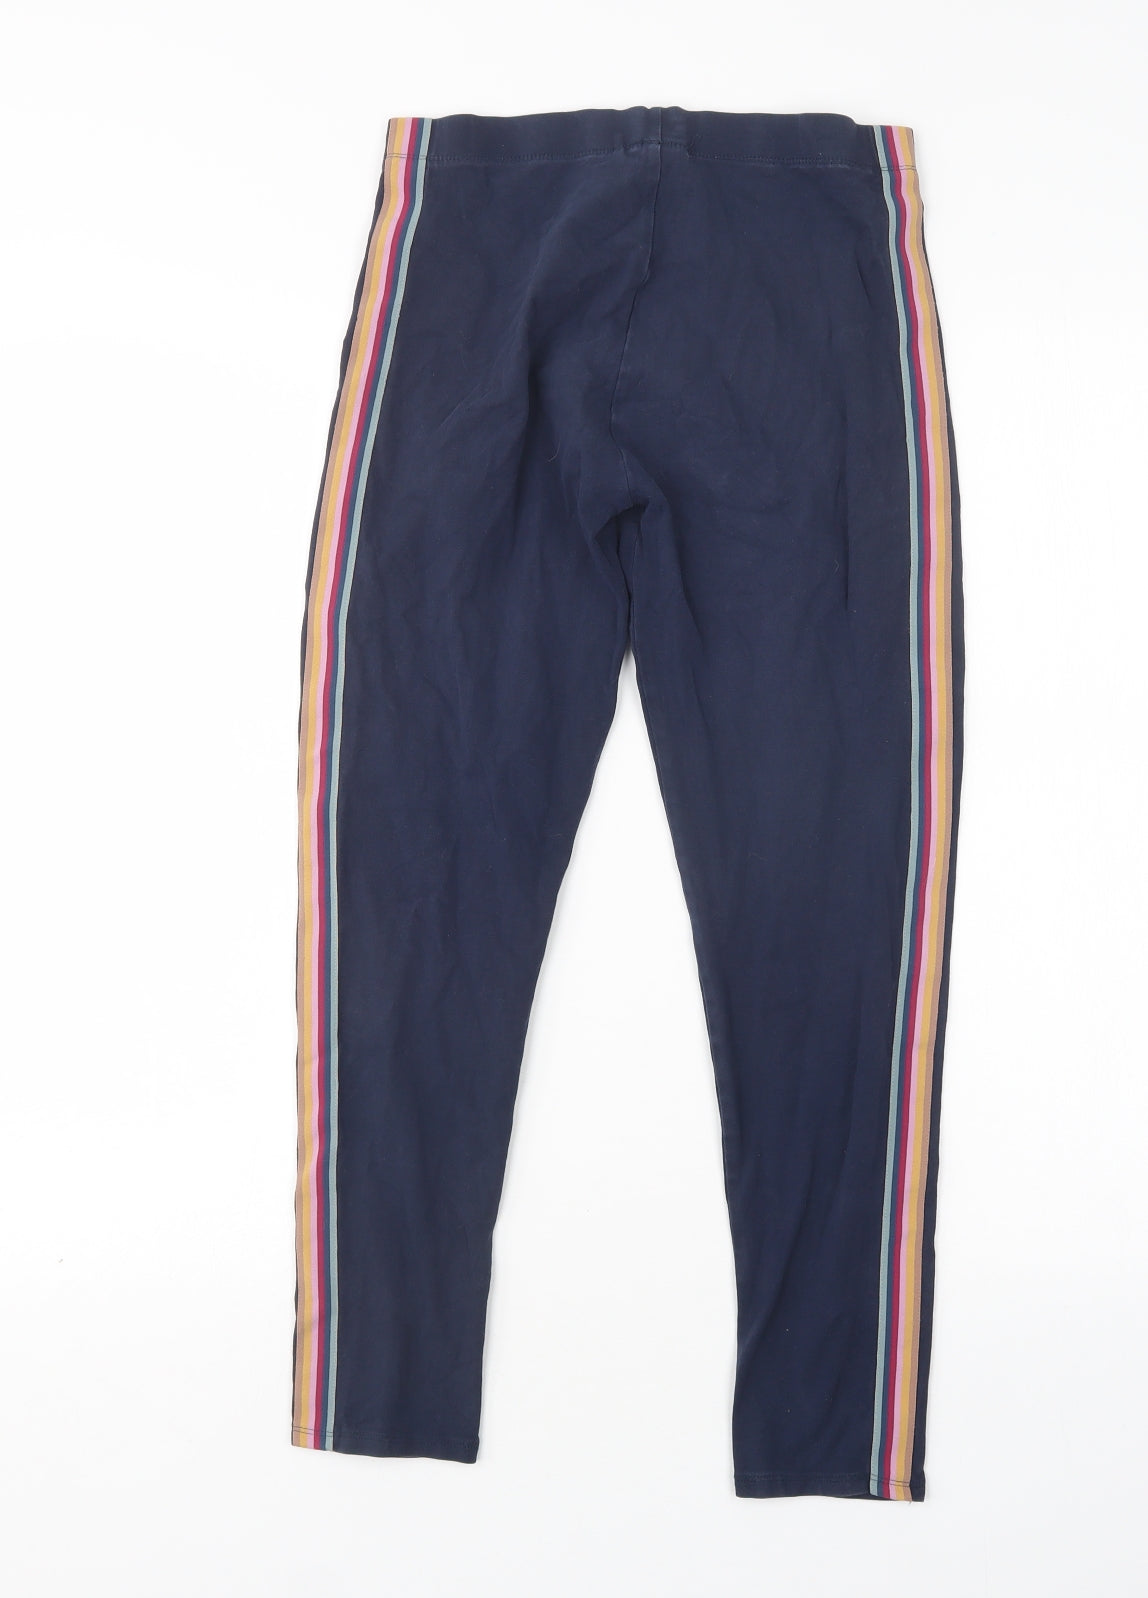 NEXT Girls Multicoloured  Cotton Sweatpants Trousers Size 14 Years  Extra-Slim